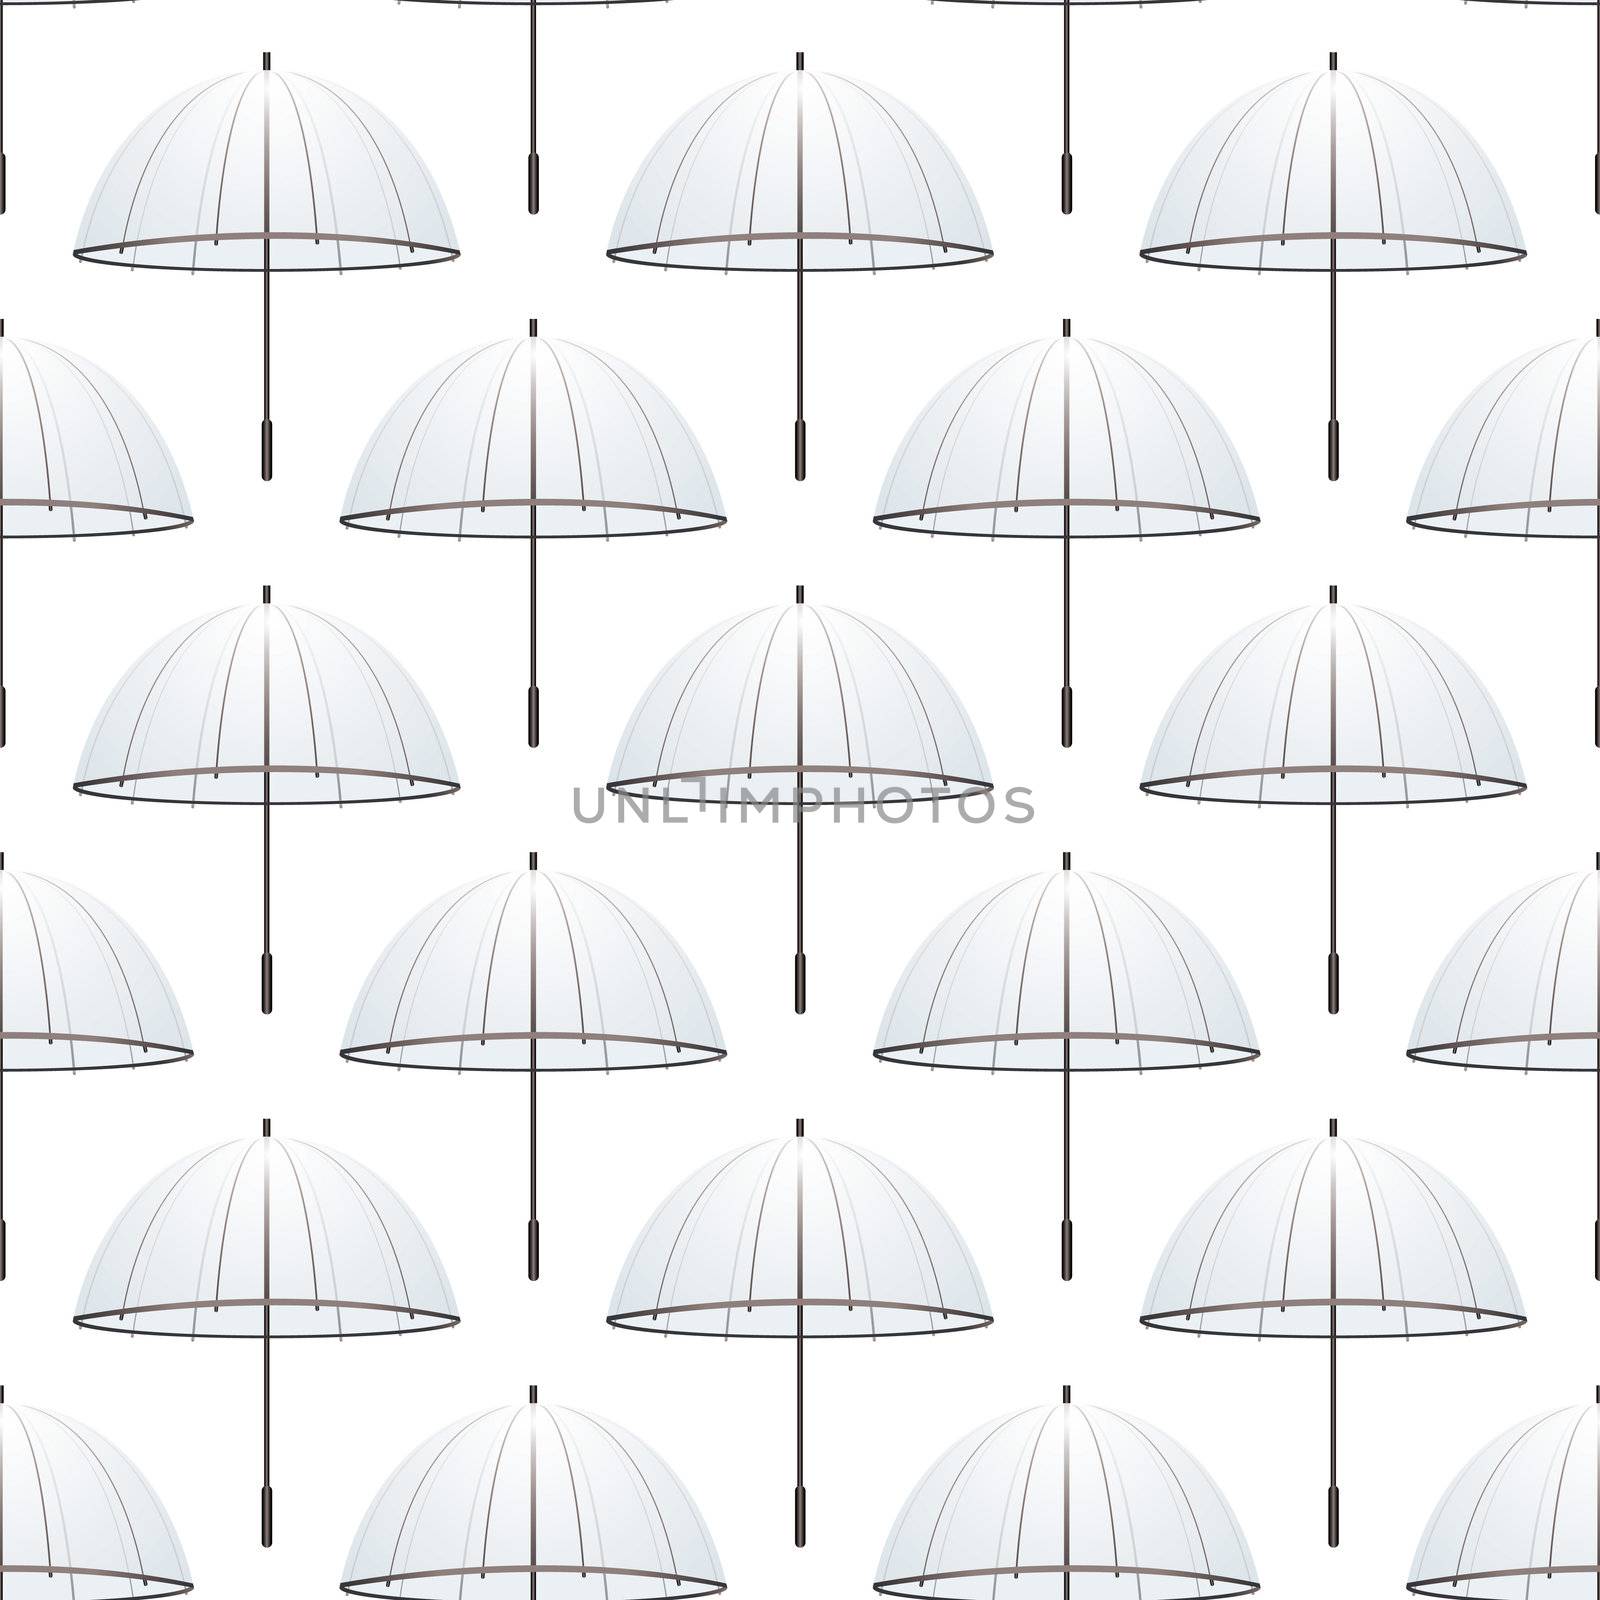 Transparent umbrella collection on a seamless tiled background